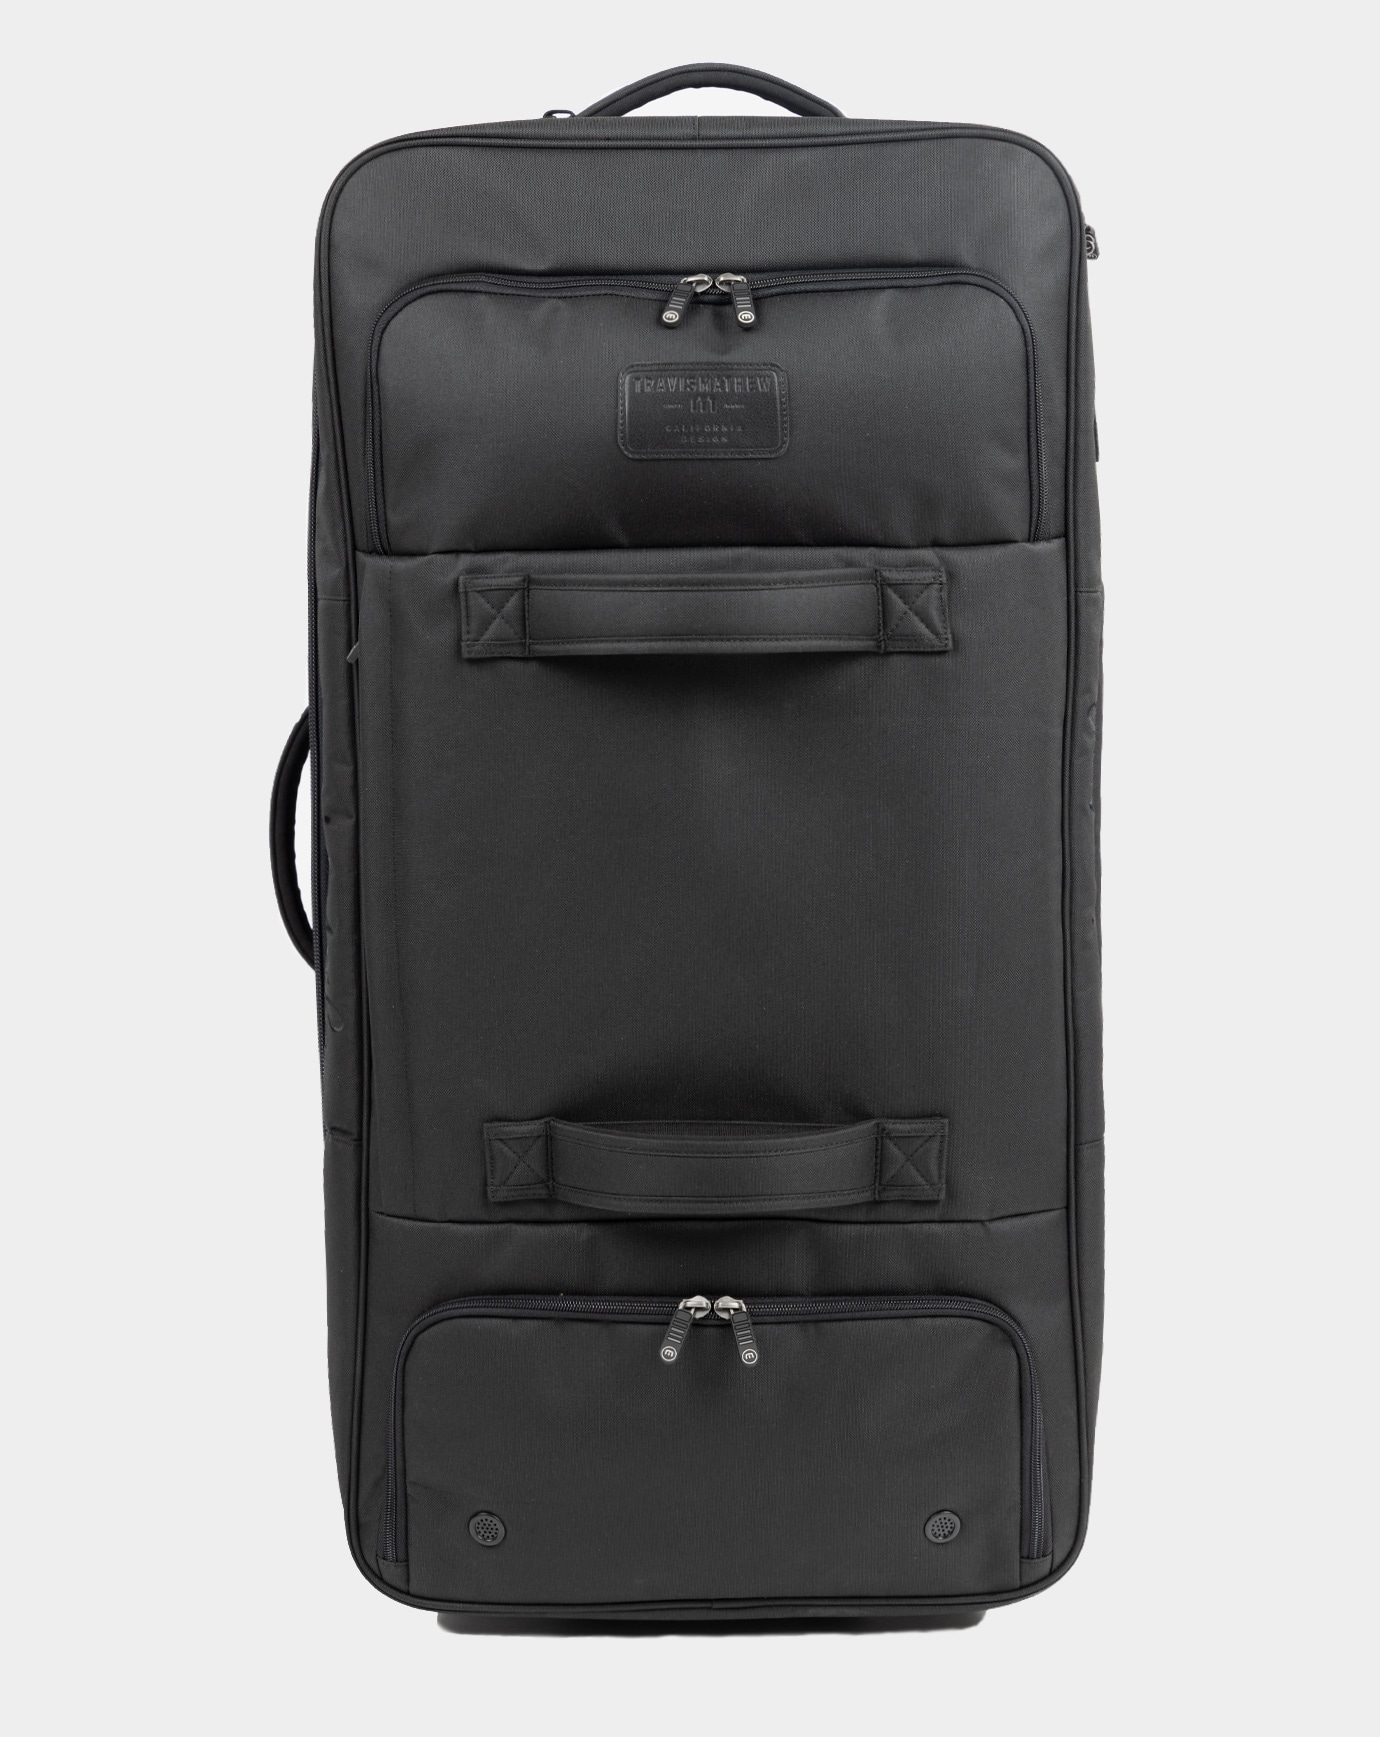 Related Product - EXPRESS 2.0 SUITCASE